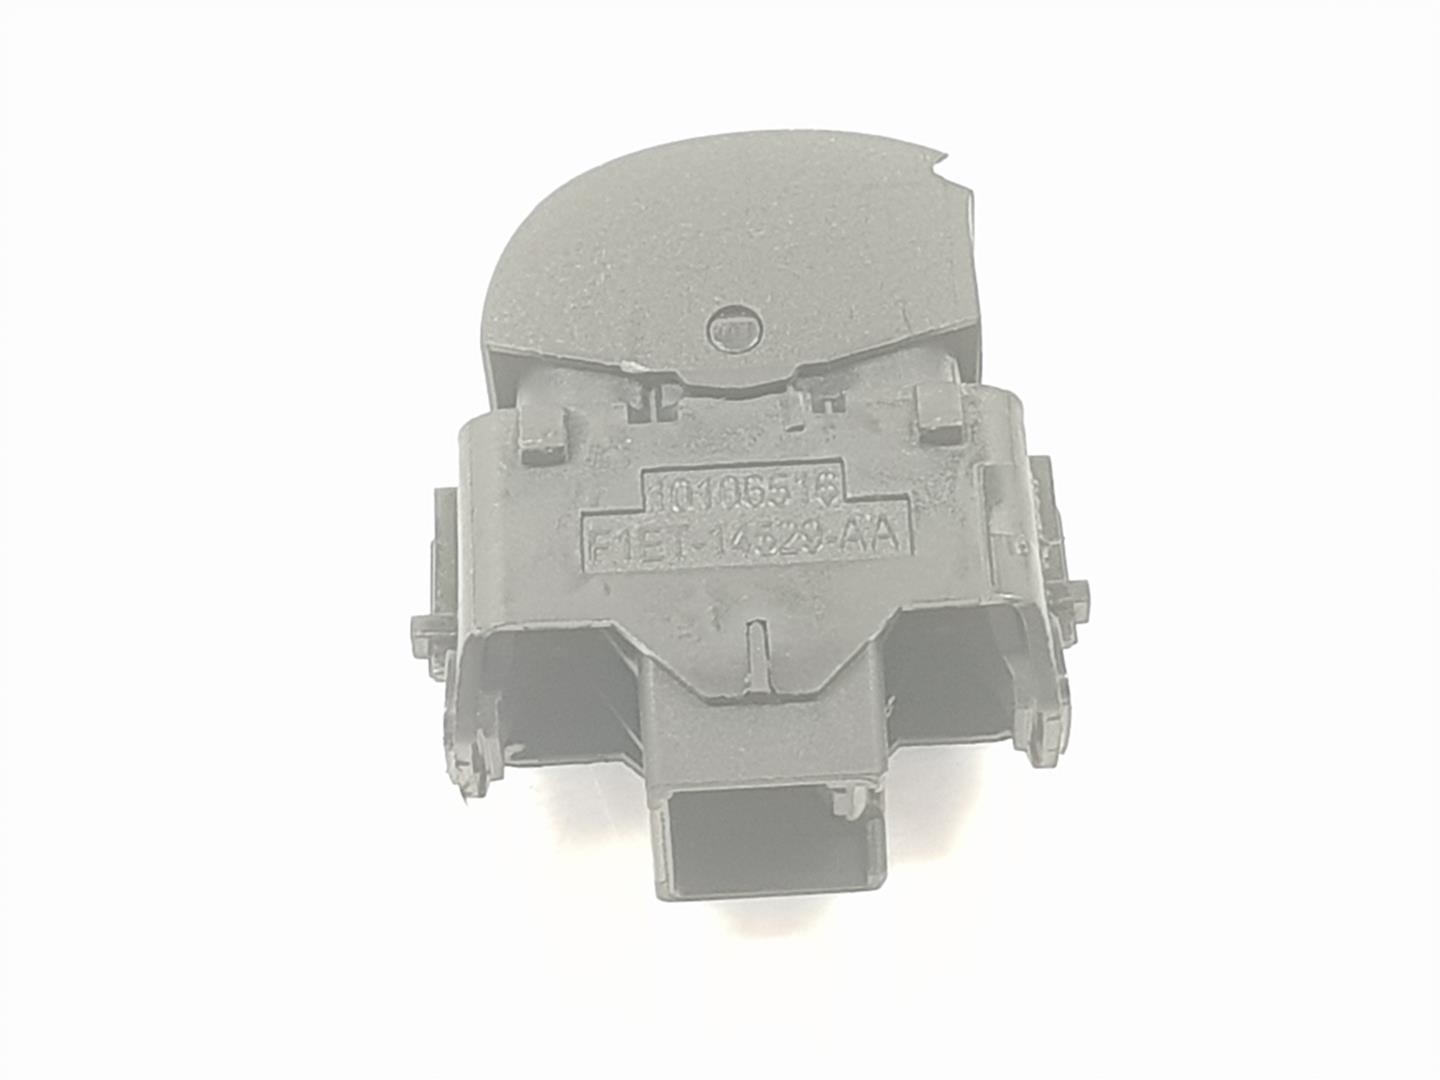 FORD Focus 3 generation (2011-2020) Rear Right Door Window Control Switch 1850432, F1ET14529AA 20414569